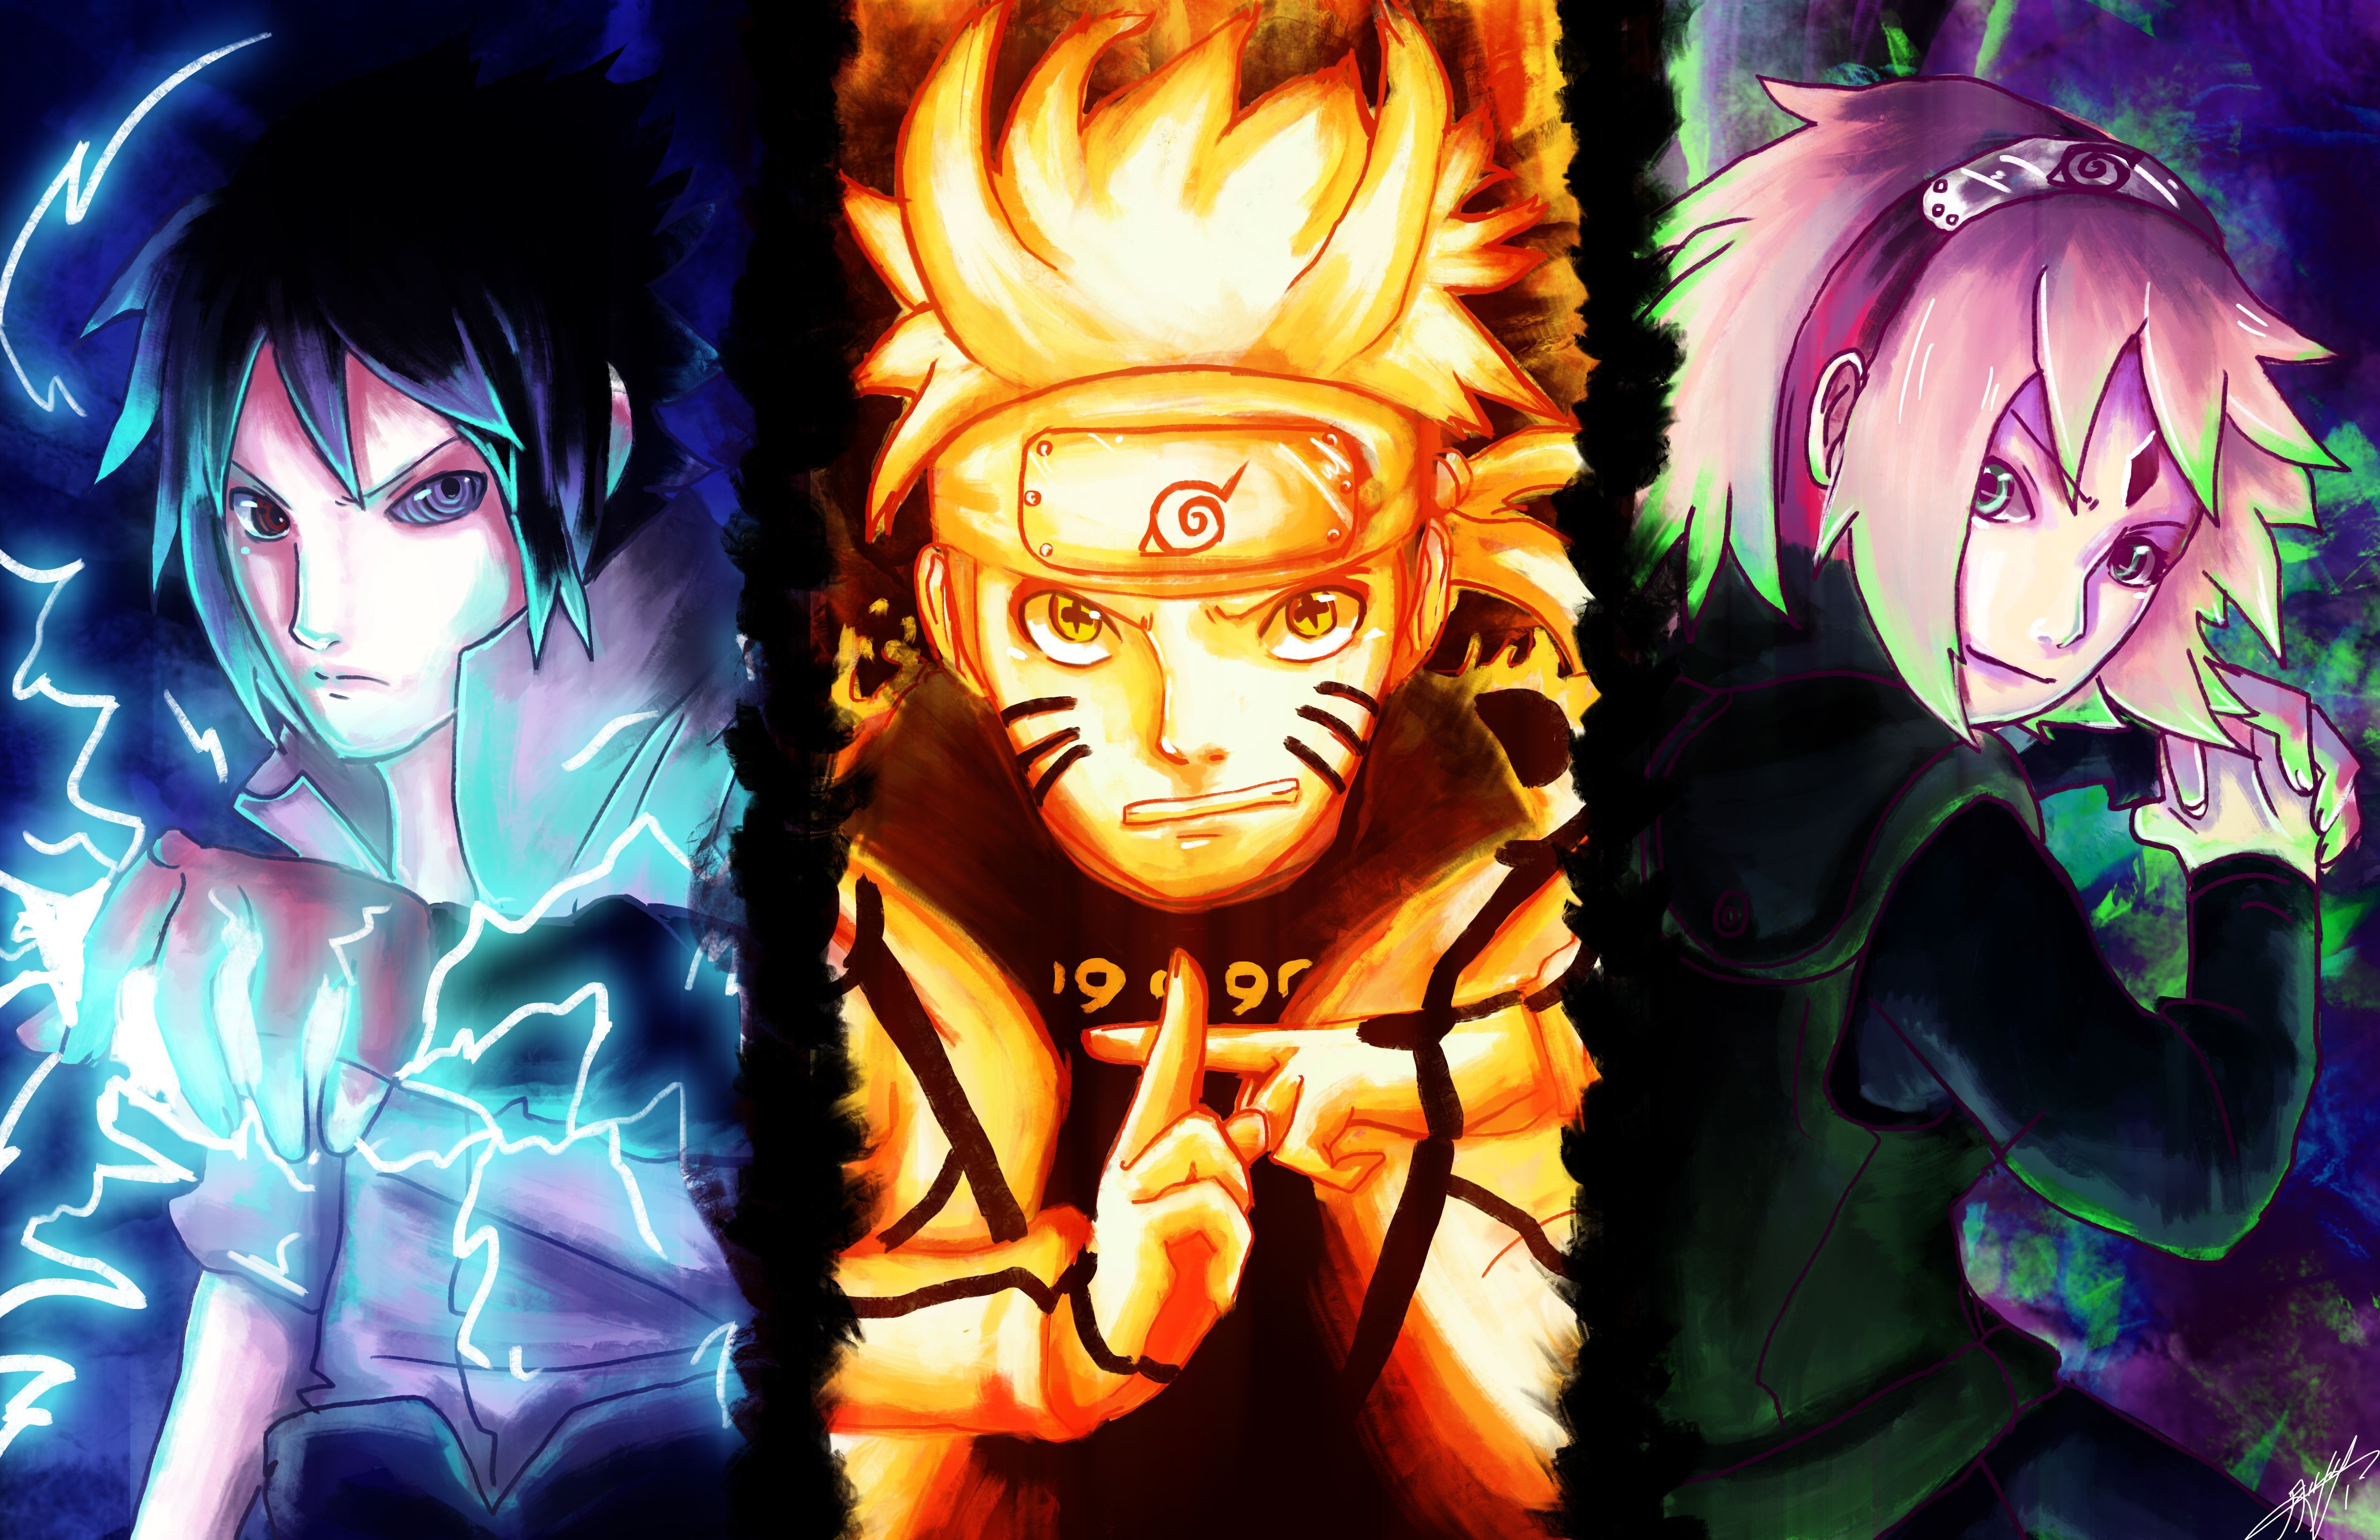 Naruto Wallpaper Collection For Free Download. Cool anime wallpaper, Naruto wallpaper, Wallpaper naruto shippuden